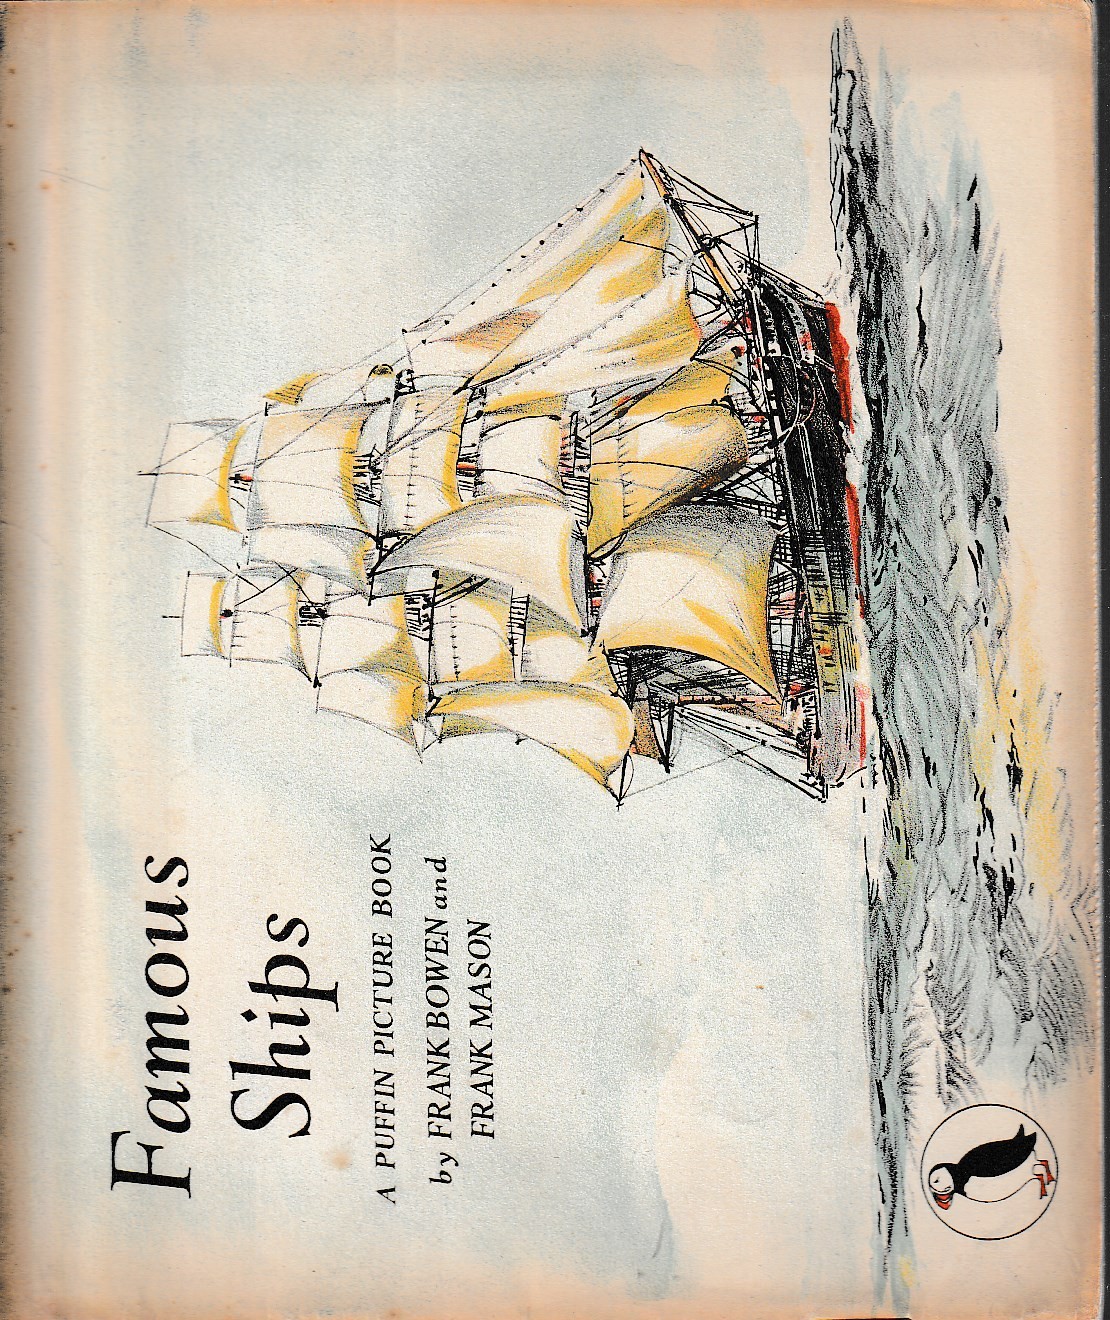 FAMOUS SHIPS front book cover image